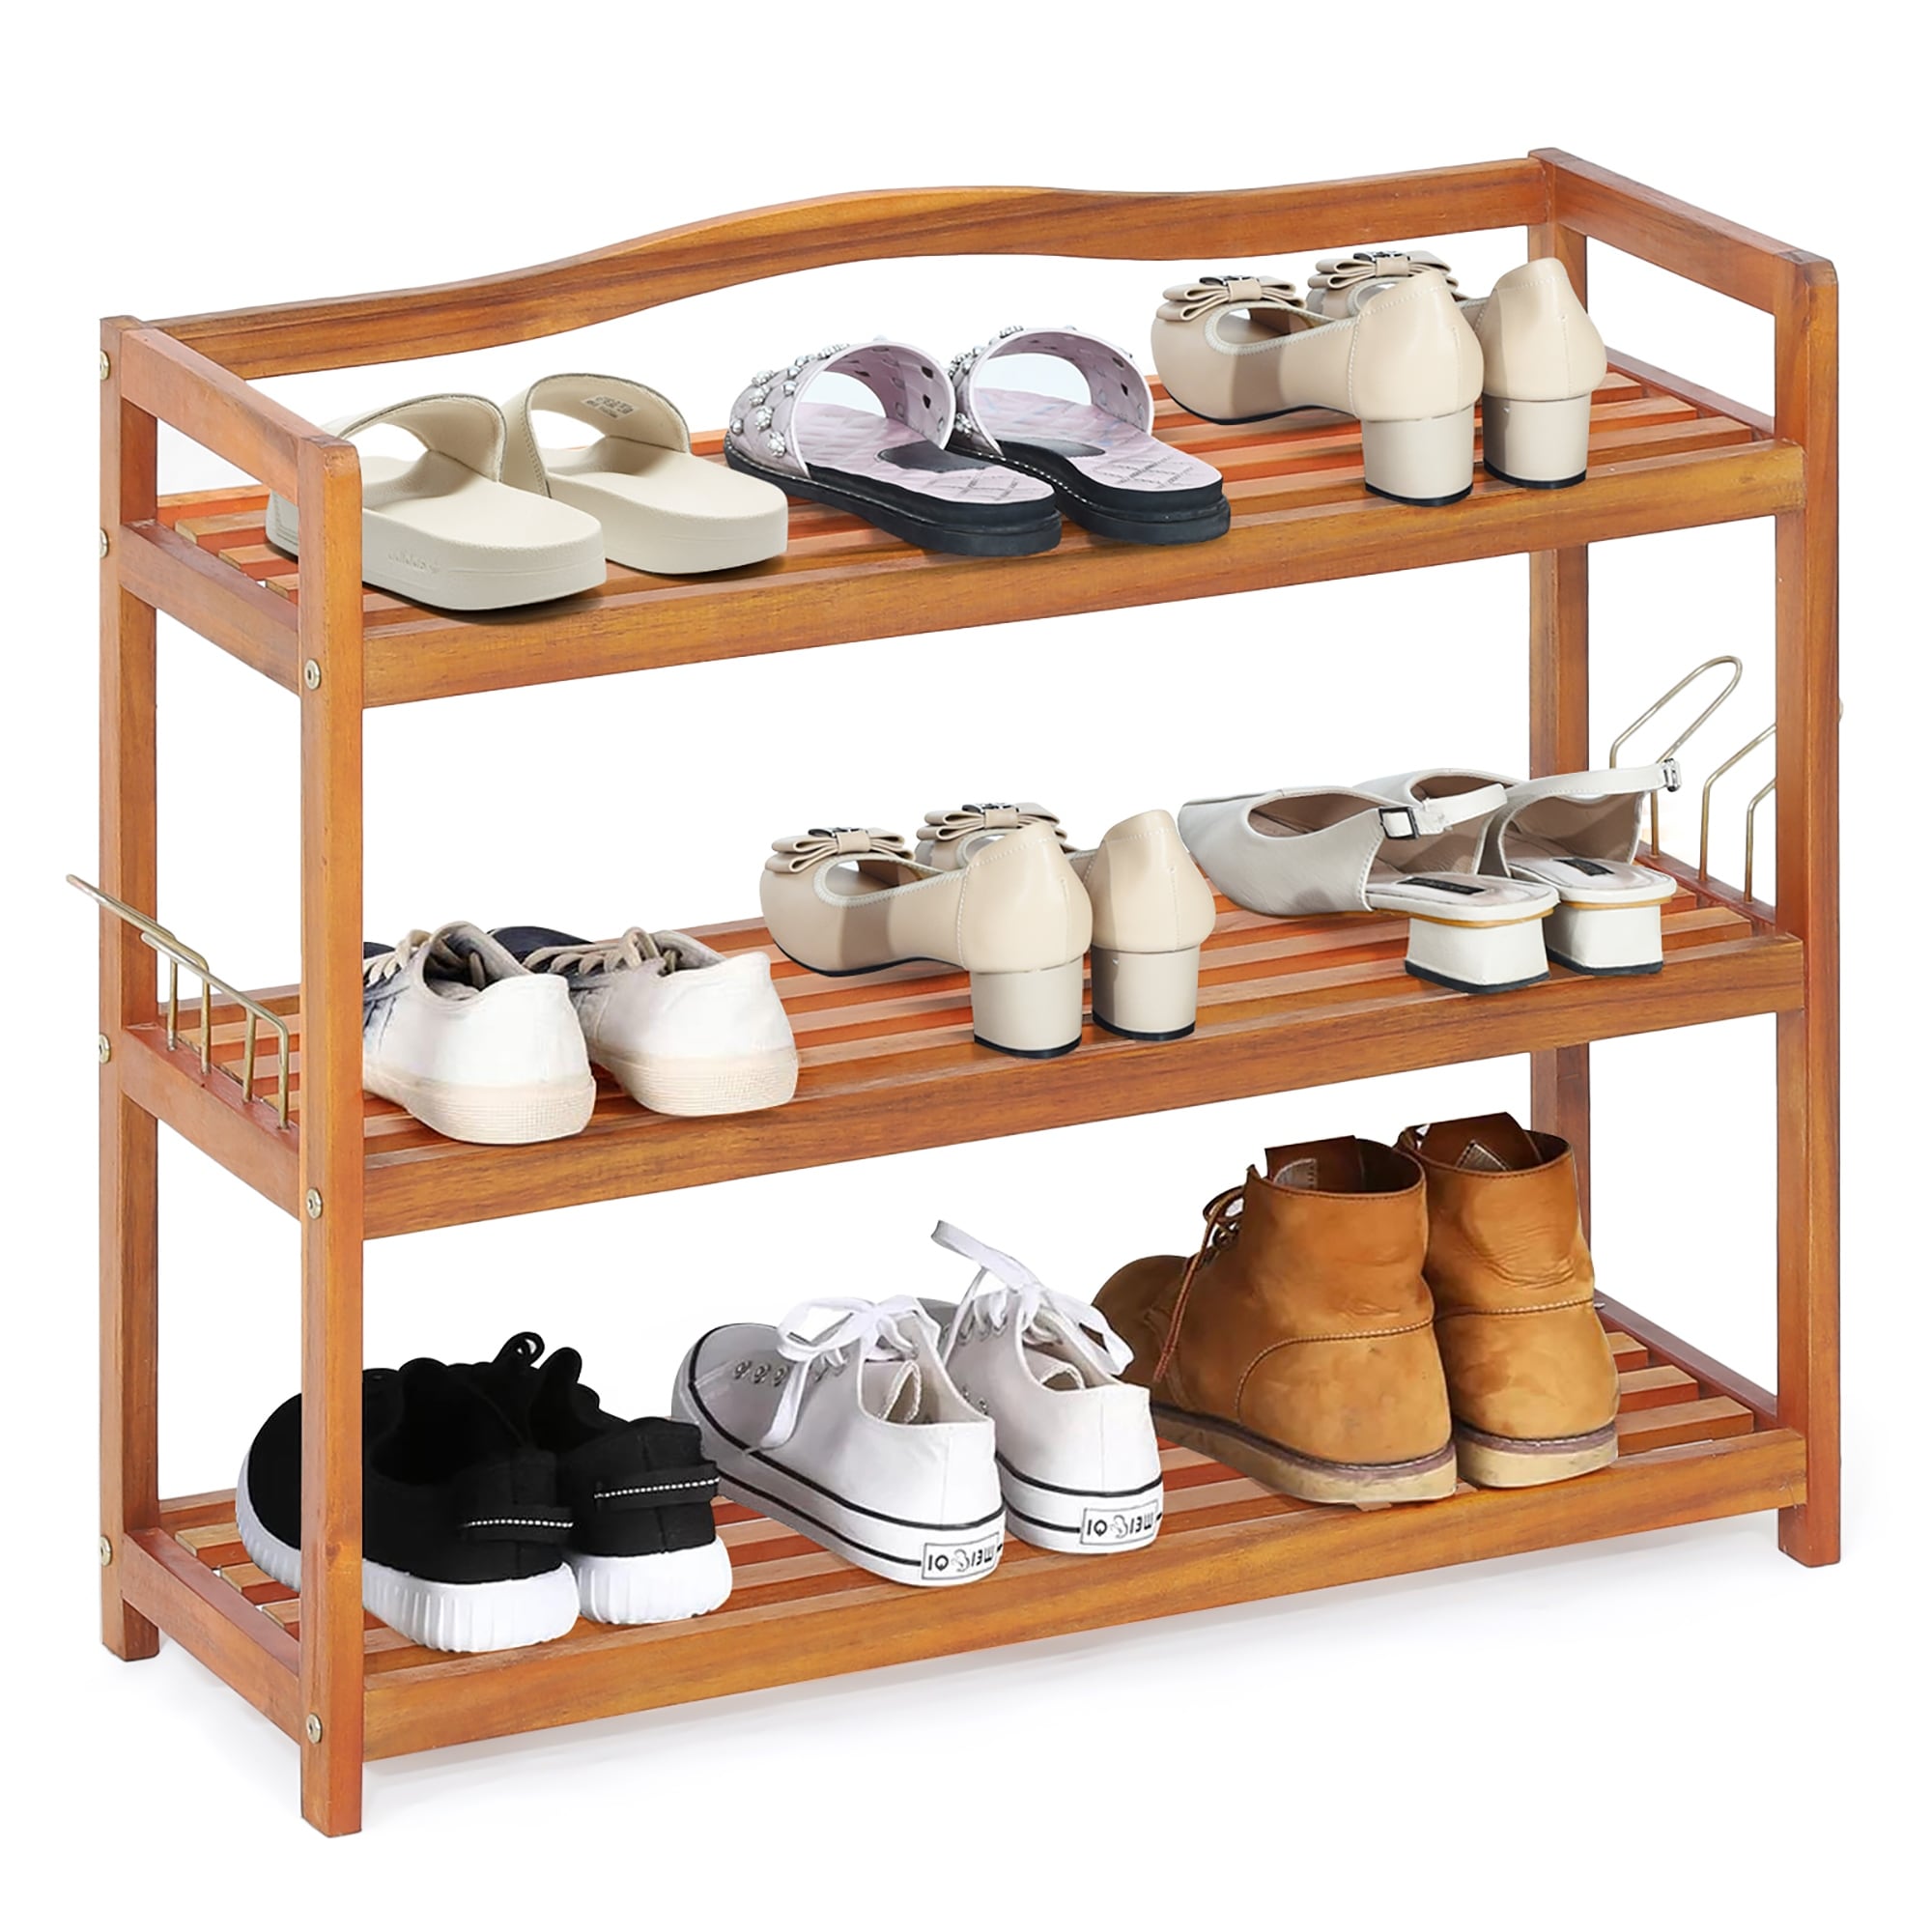 https://ak1.ostkcdn.com/images/products/is/images/direct/dfd33edd03d3d4a06633395d9b650d8f42da3a43/Costway-3-Tier-Wood-Shoe-Rack-Solid-Acacia-Wood-Shoe-Shelf-with-Side.jpg